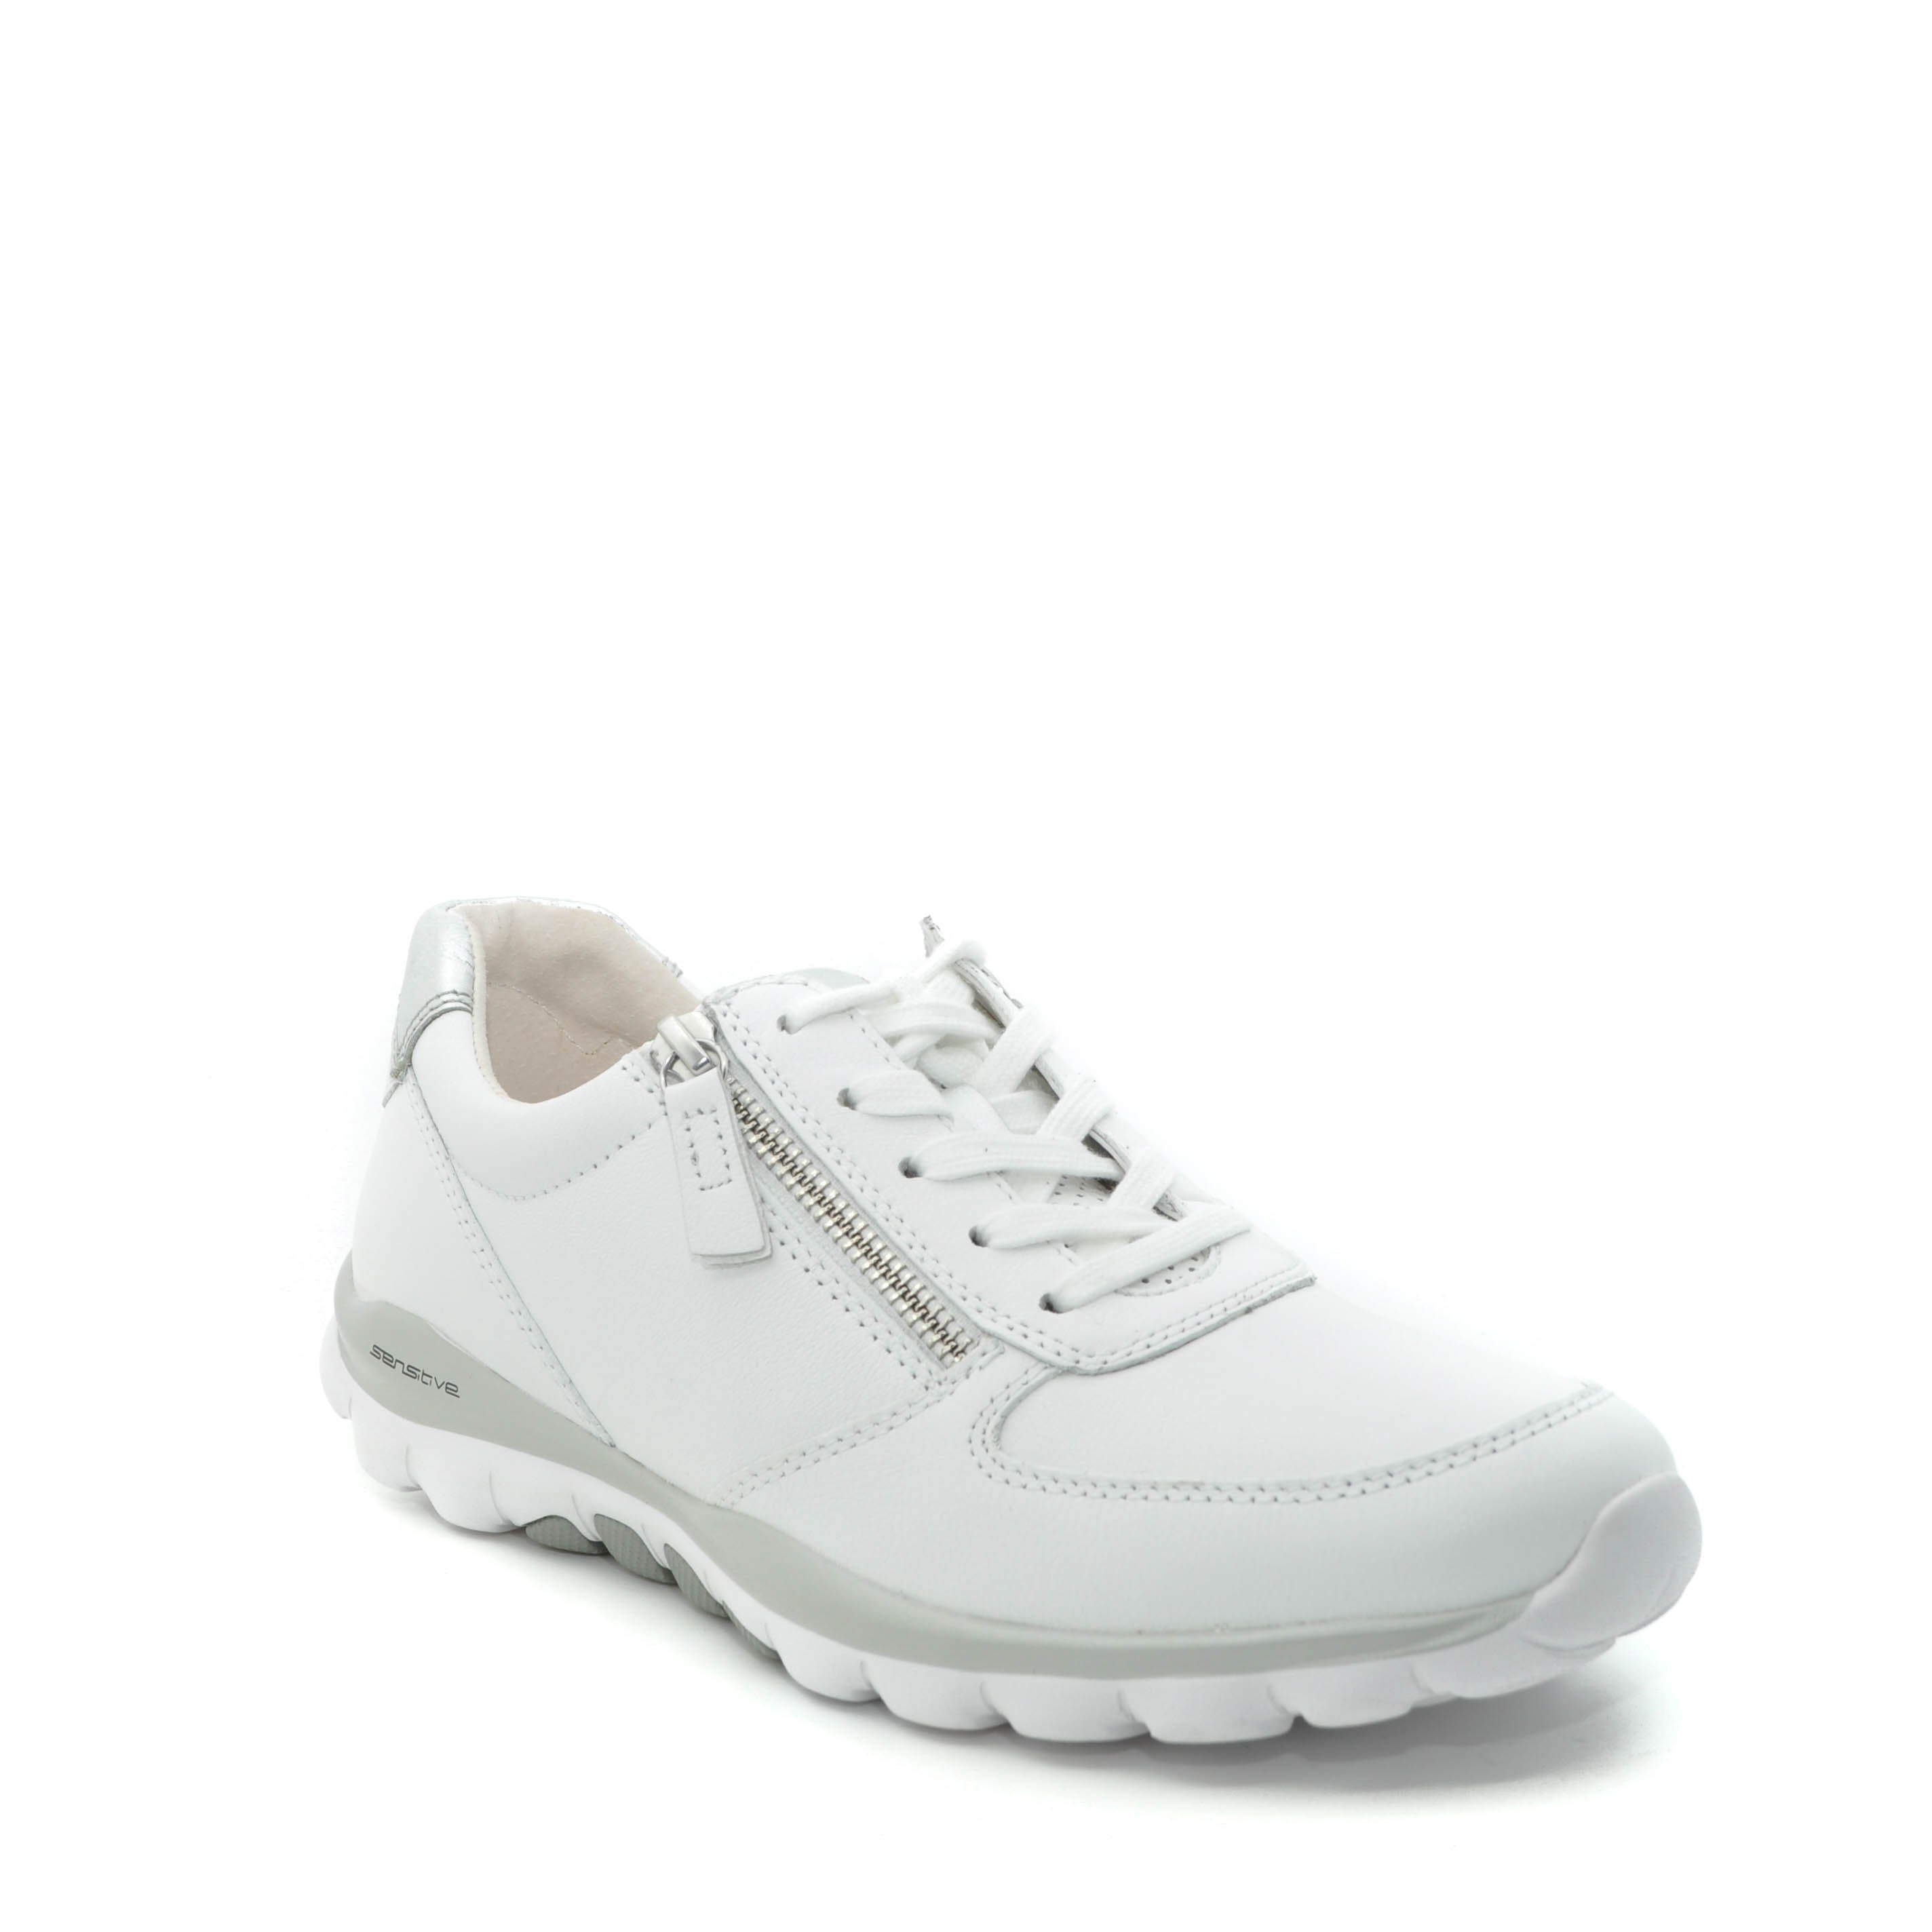 GABOR rolling soft shoes online ireland